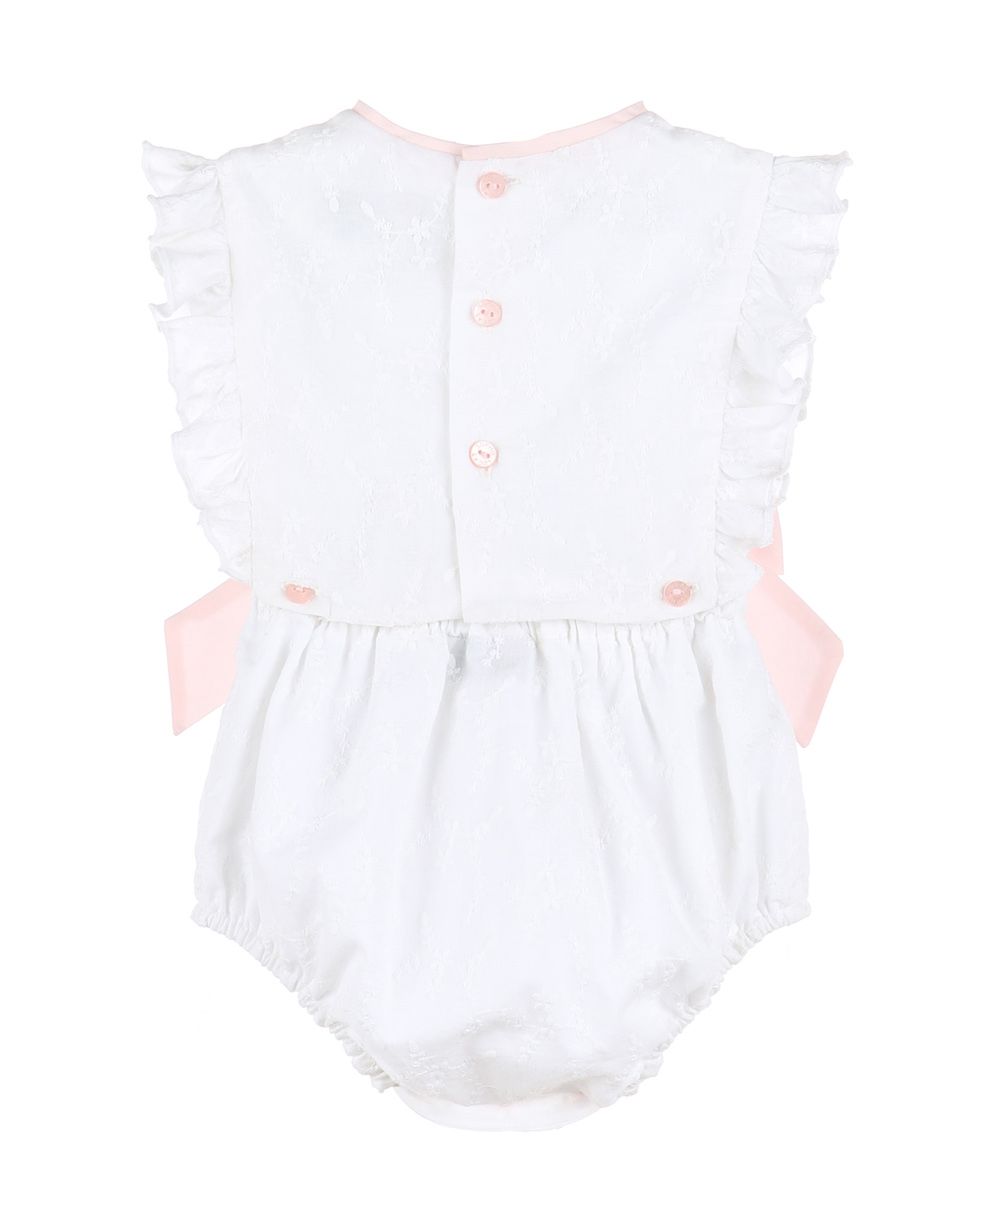 White & Pink Classic Overall With Bows